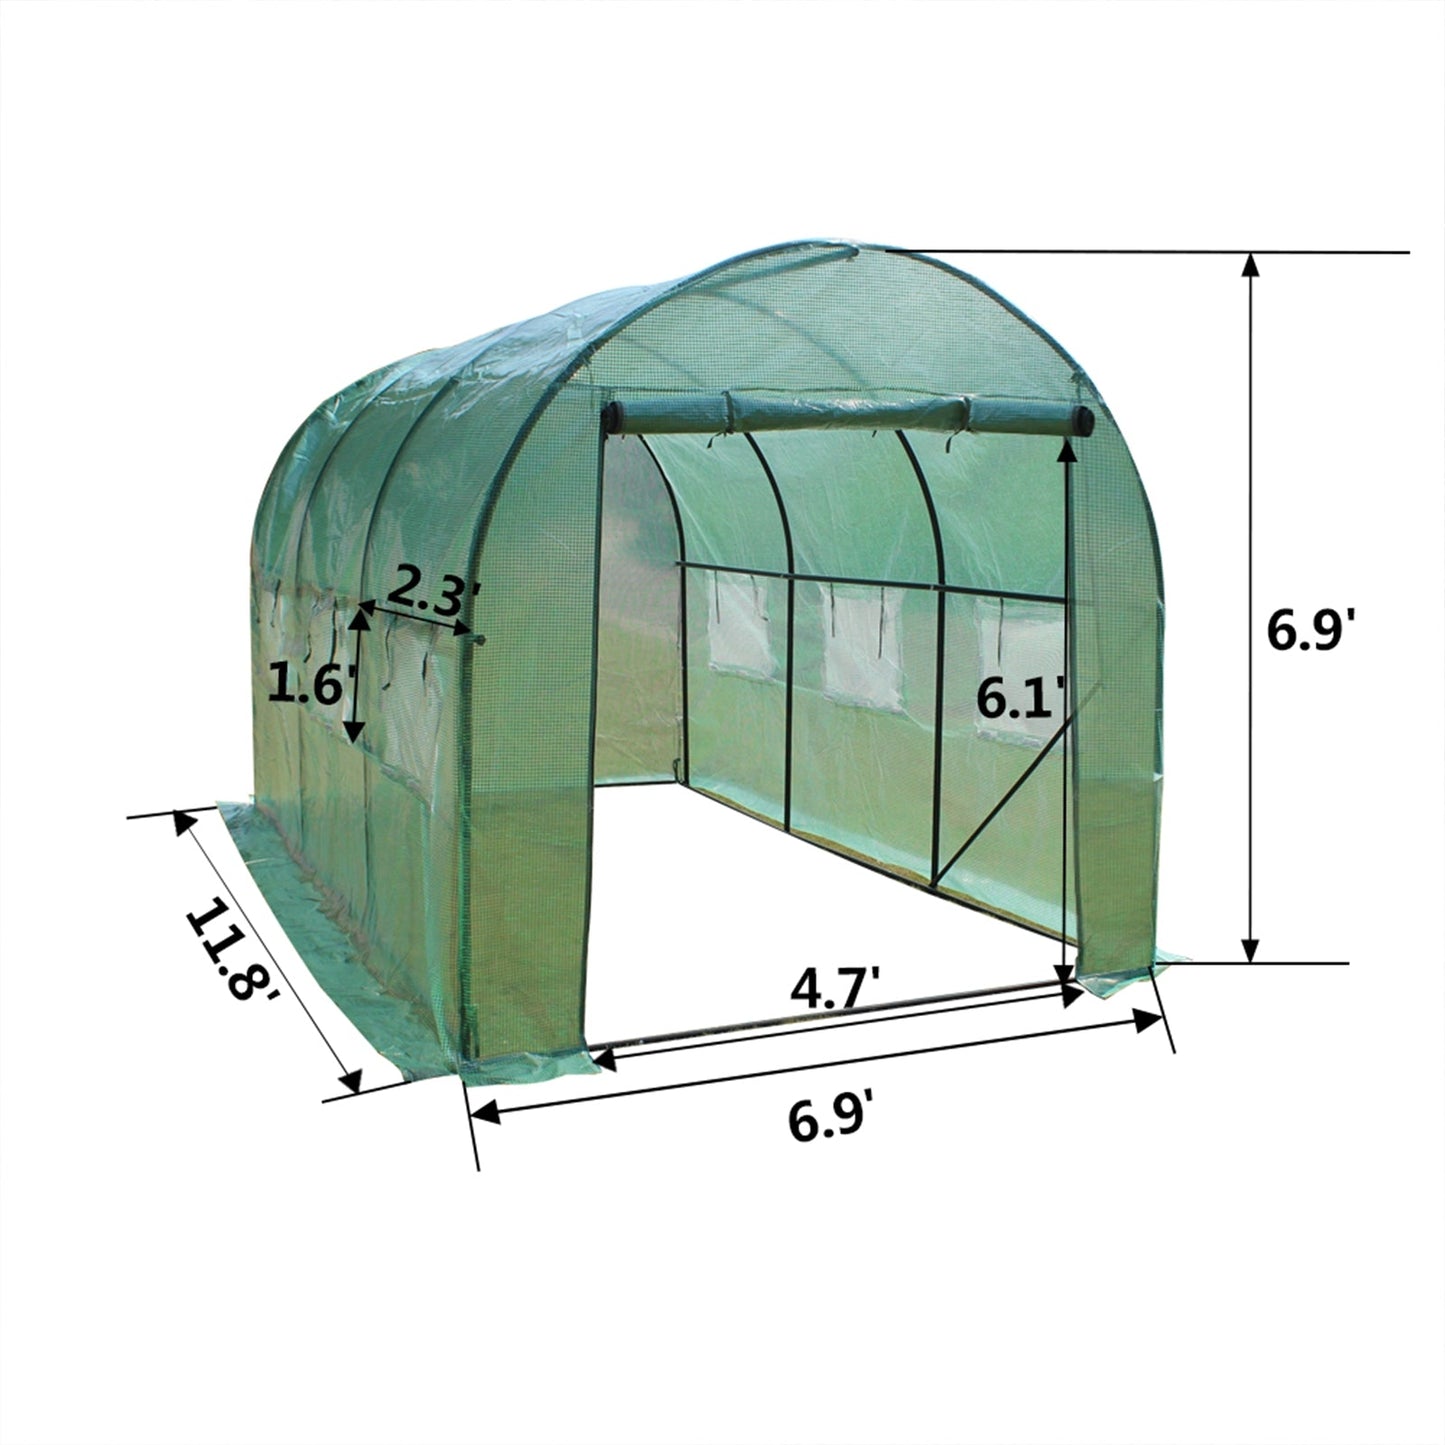 THBOXES 12鈥瞲7鈥瞲7鈥?Indoor Outdoor Greenhouse for Garden Patio Backyard Balcony Green